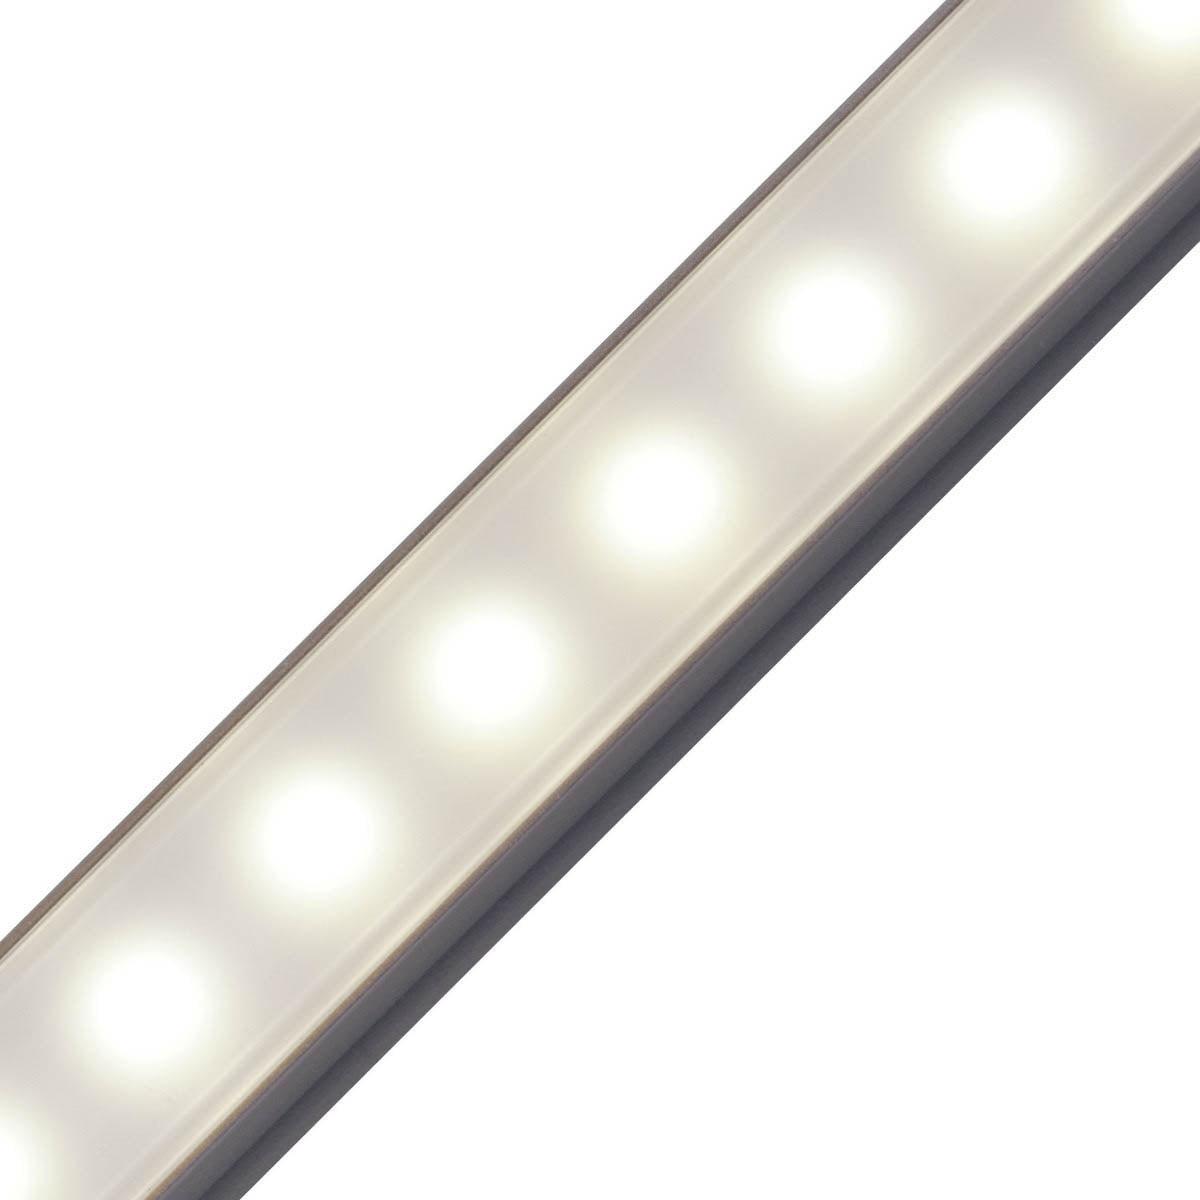 96in. Tape Light Frosted Channel Cover, Pack of 10